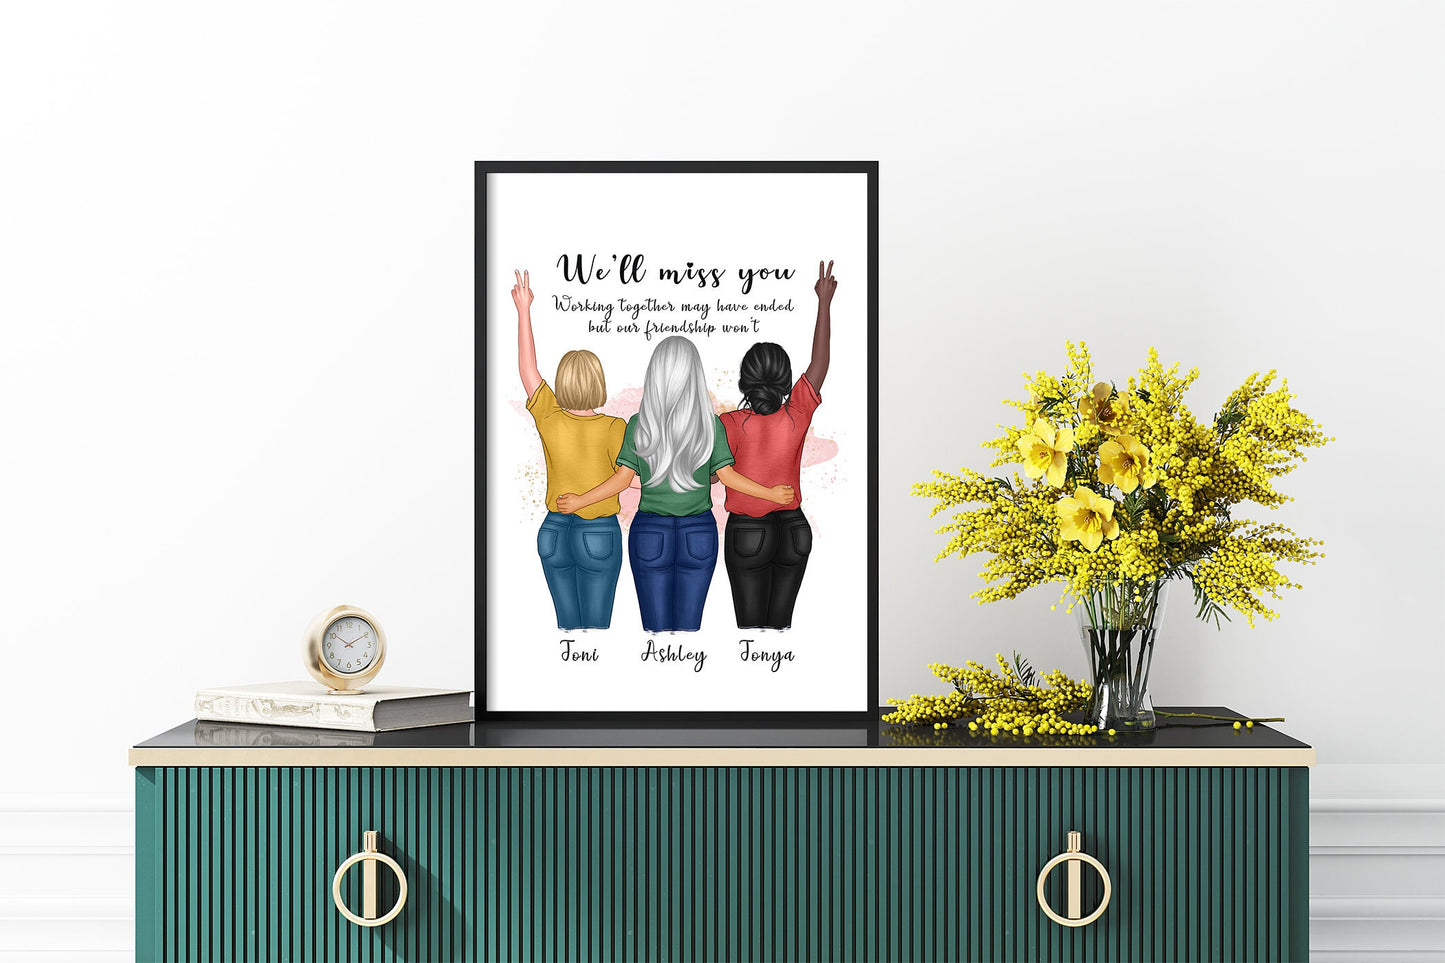 Personalised colleague print, wall art of work besties, new job gift, leaving gift, team member goodbye gift | A4 | A5 | Greeting card